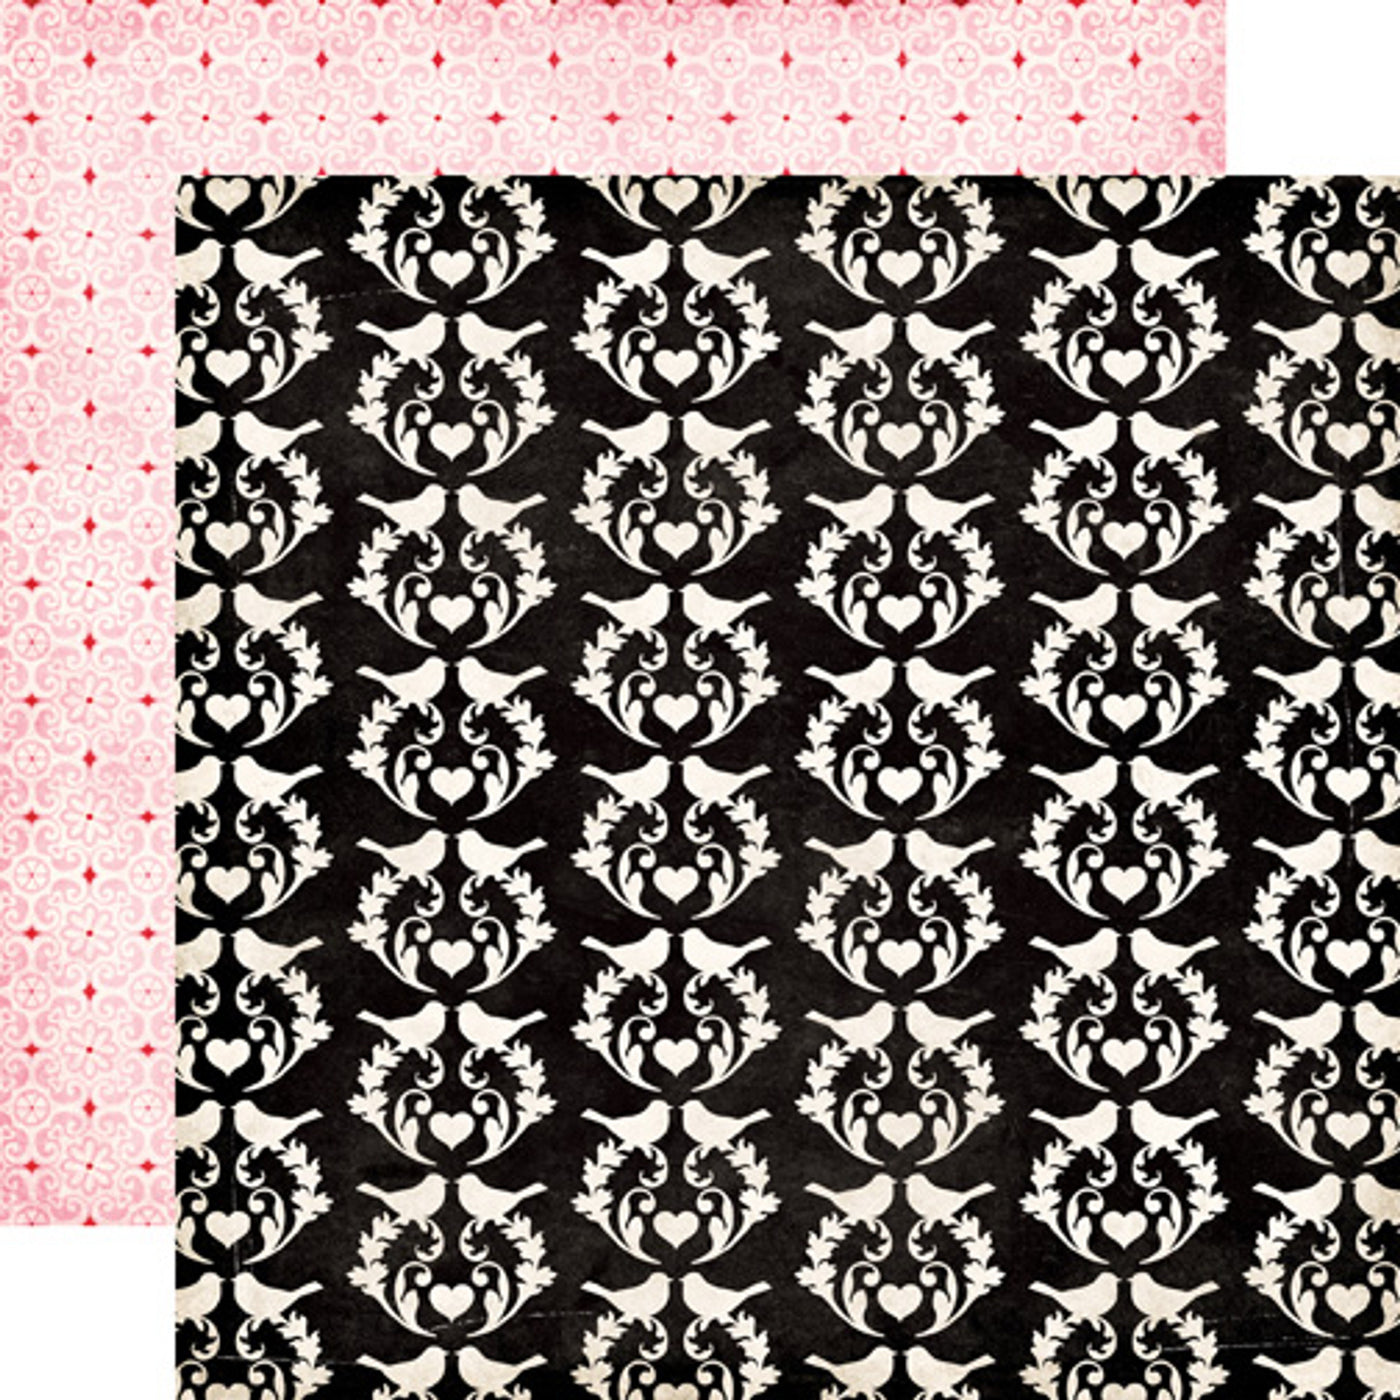 LOVE BIRDS - 12x12 Double-Sided Patterned Paper - Echo Park